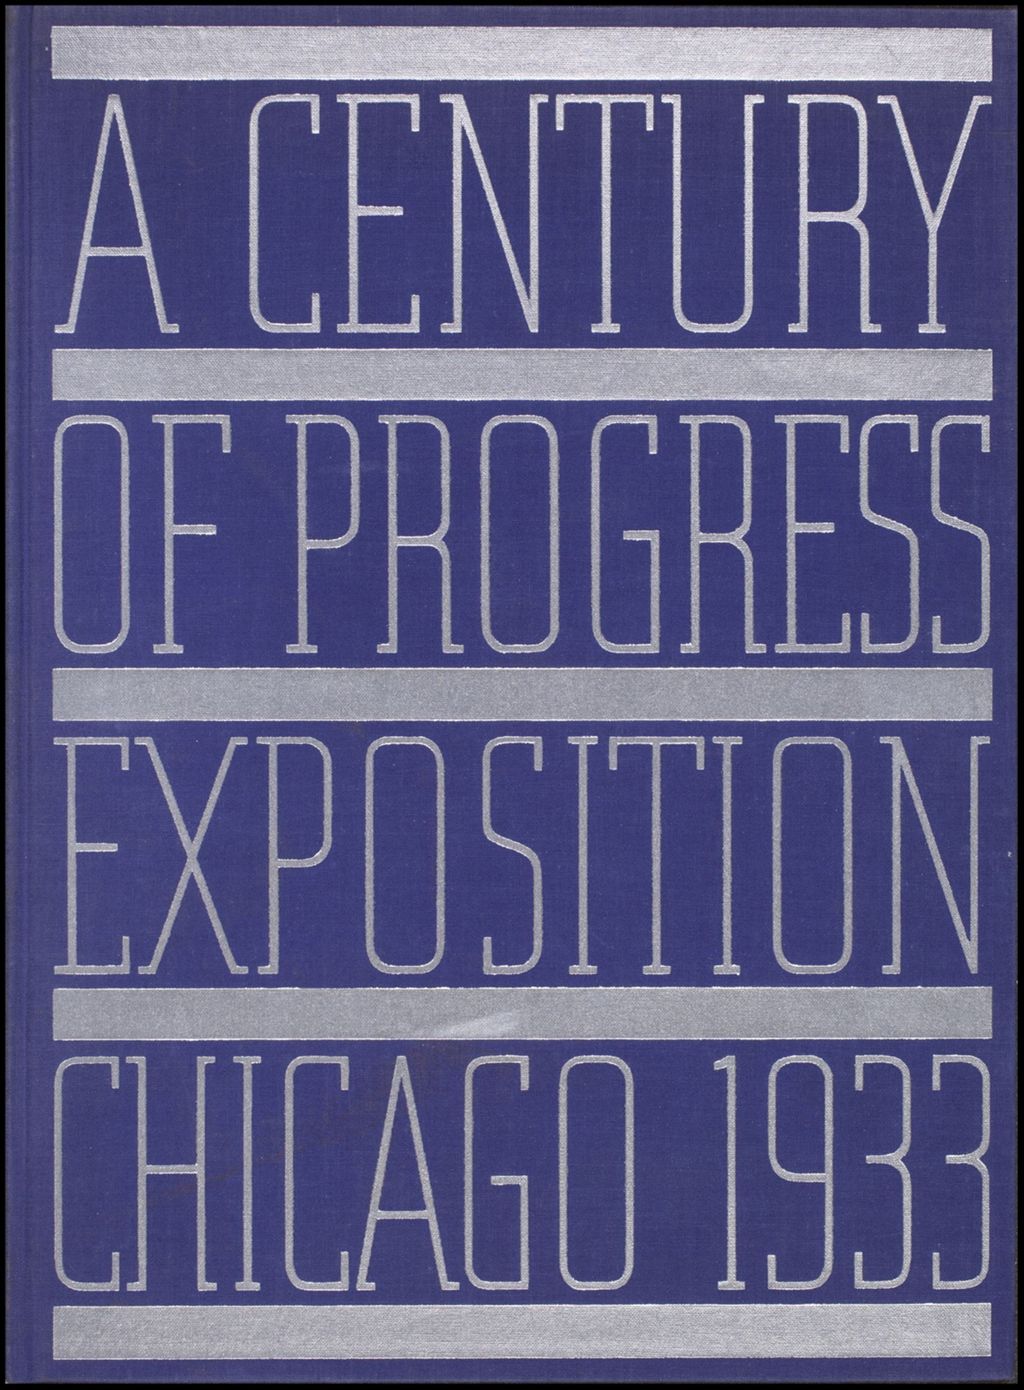 The official pictures of A Century of Progress exposition, Chicago 1933 (Folder 16-196)